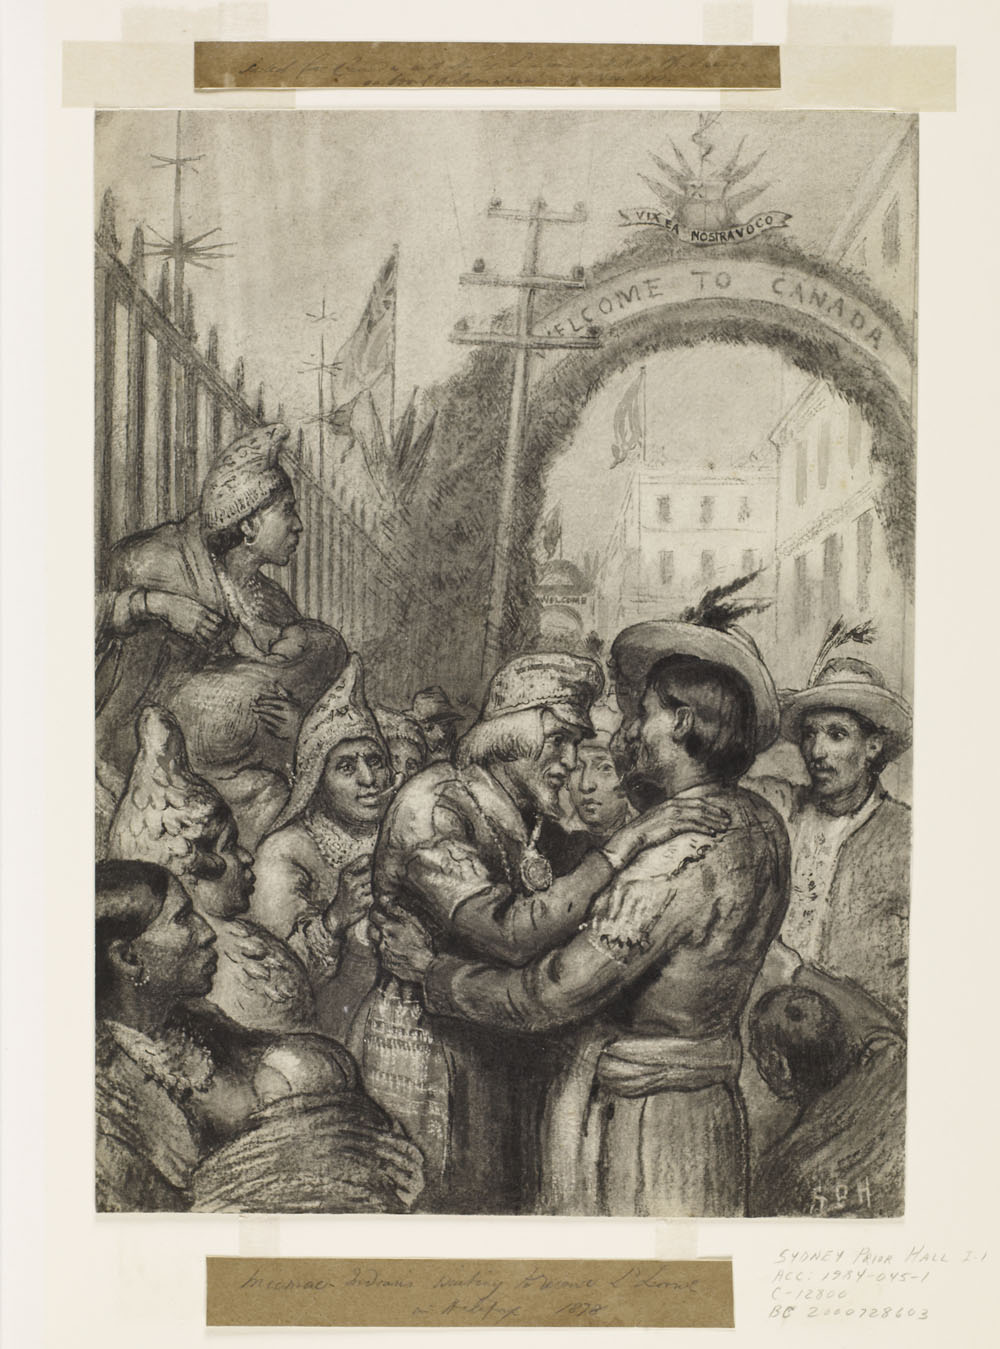 Drawing of a group of Indigenous people receiving a lord. Behind is a "Welcome to Canada" arch.